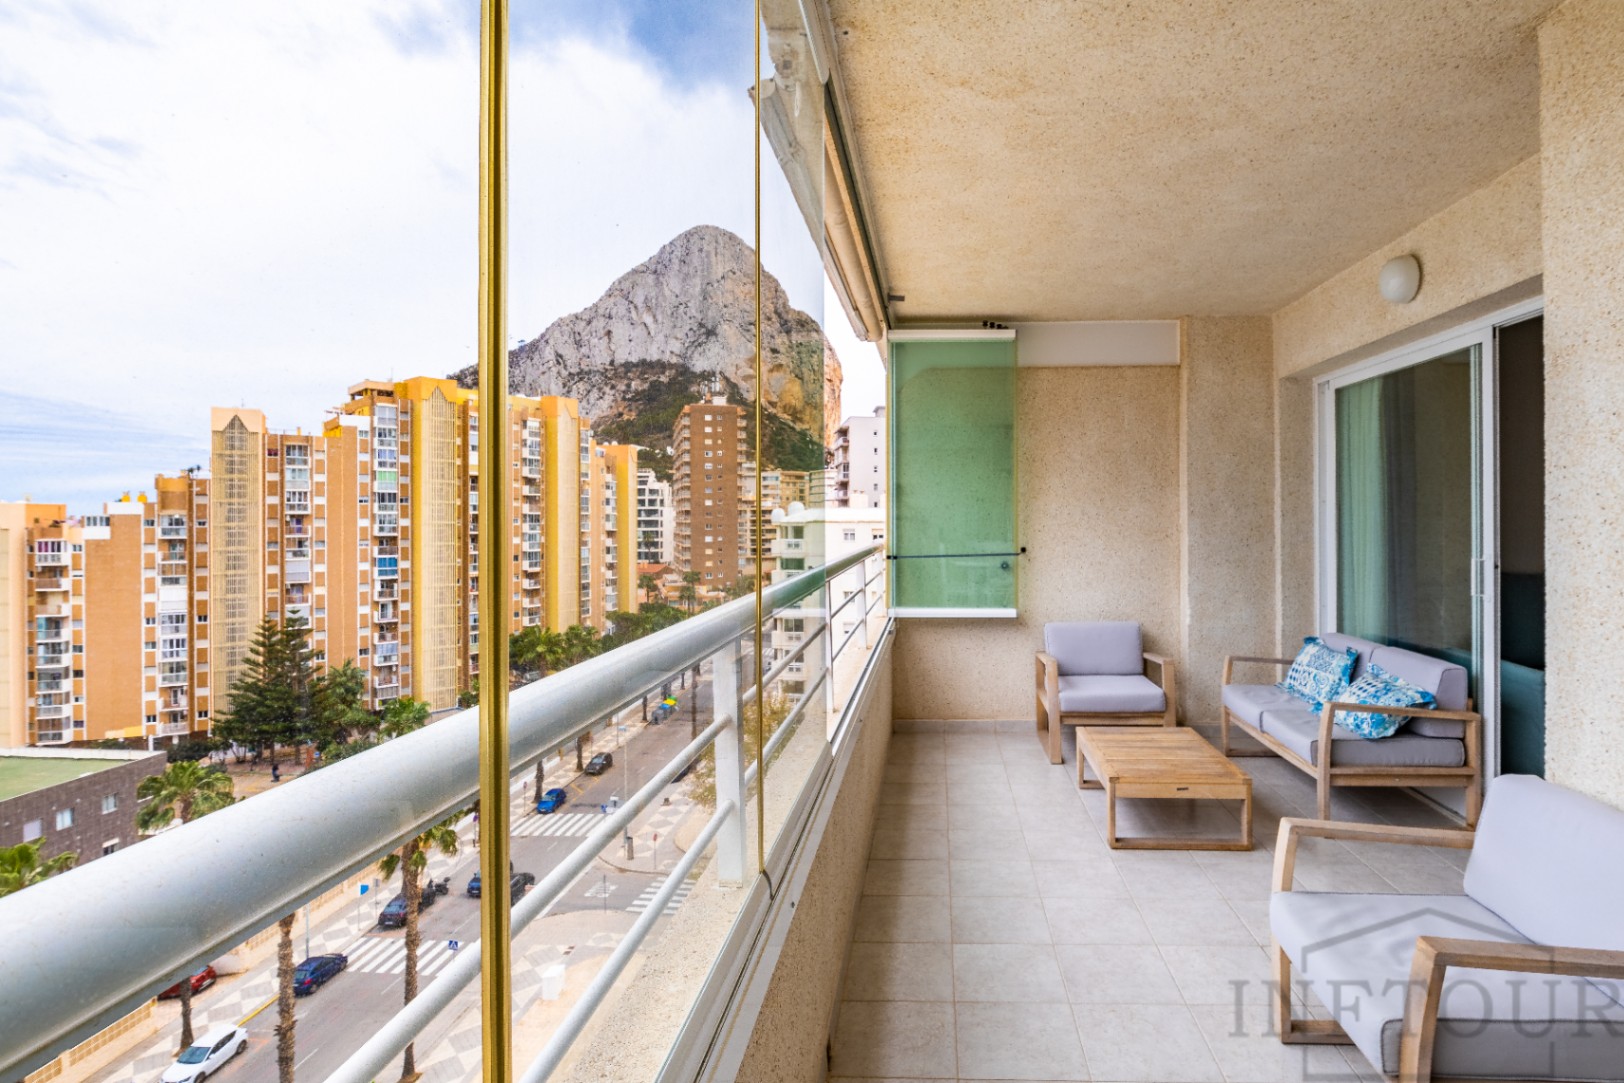 Apartment for sale with sea views in Calpe